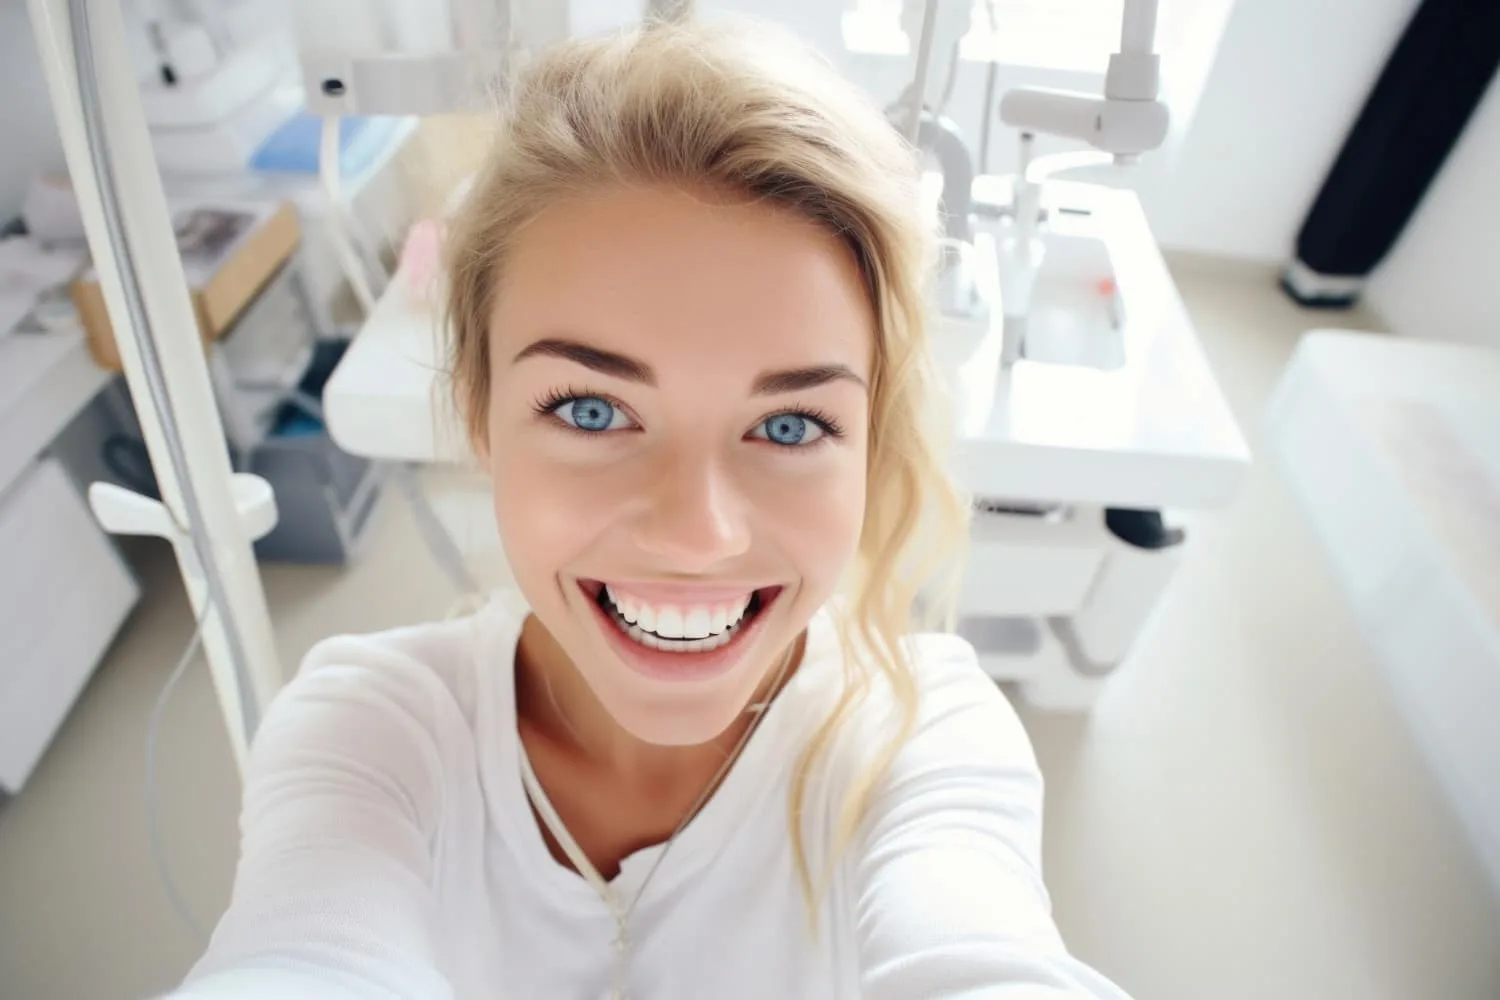 Get Your Teeth Fixed in Turkey Procedure and Cost Overview